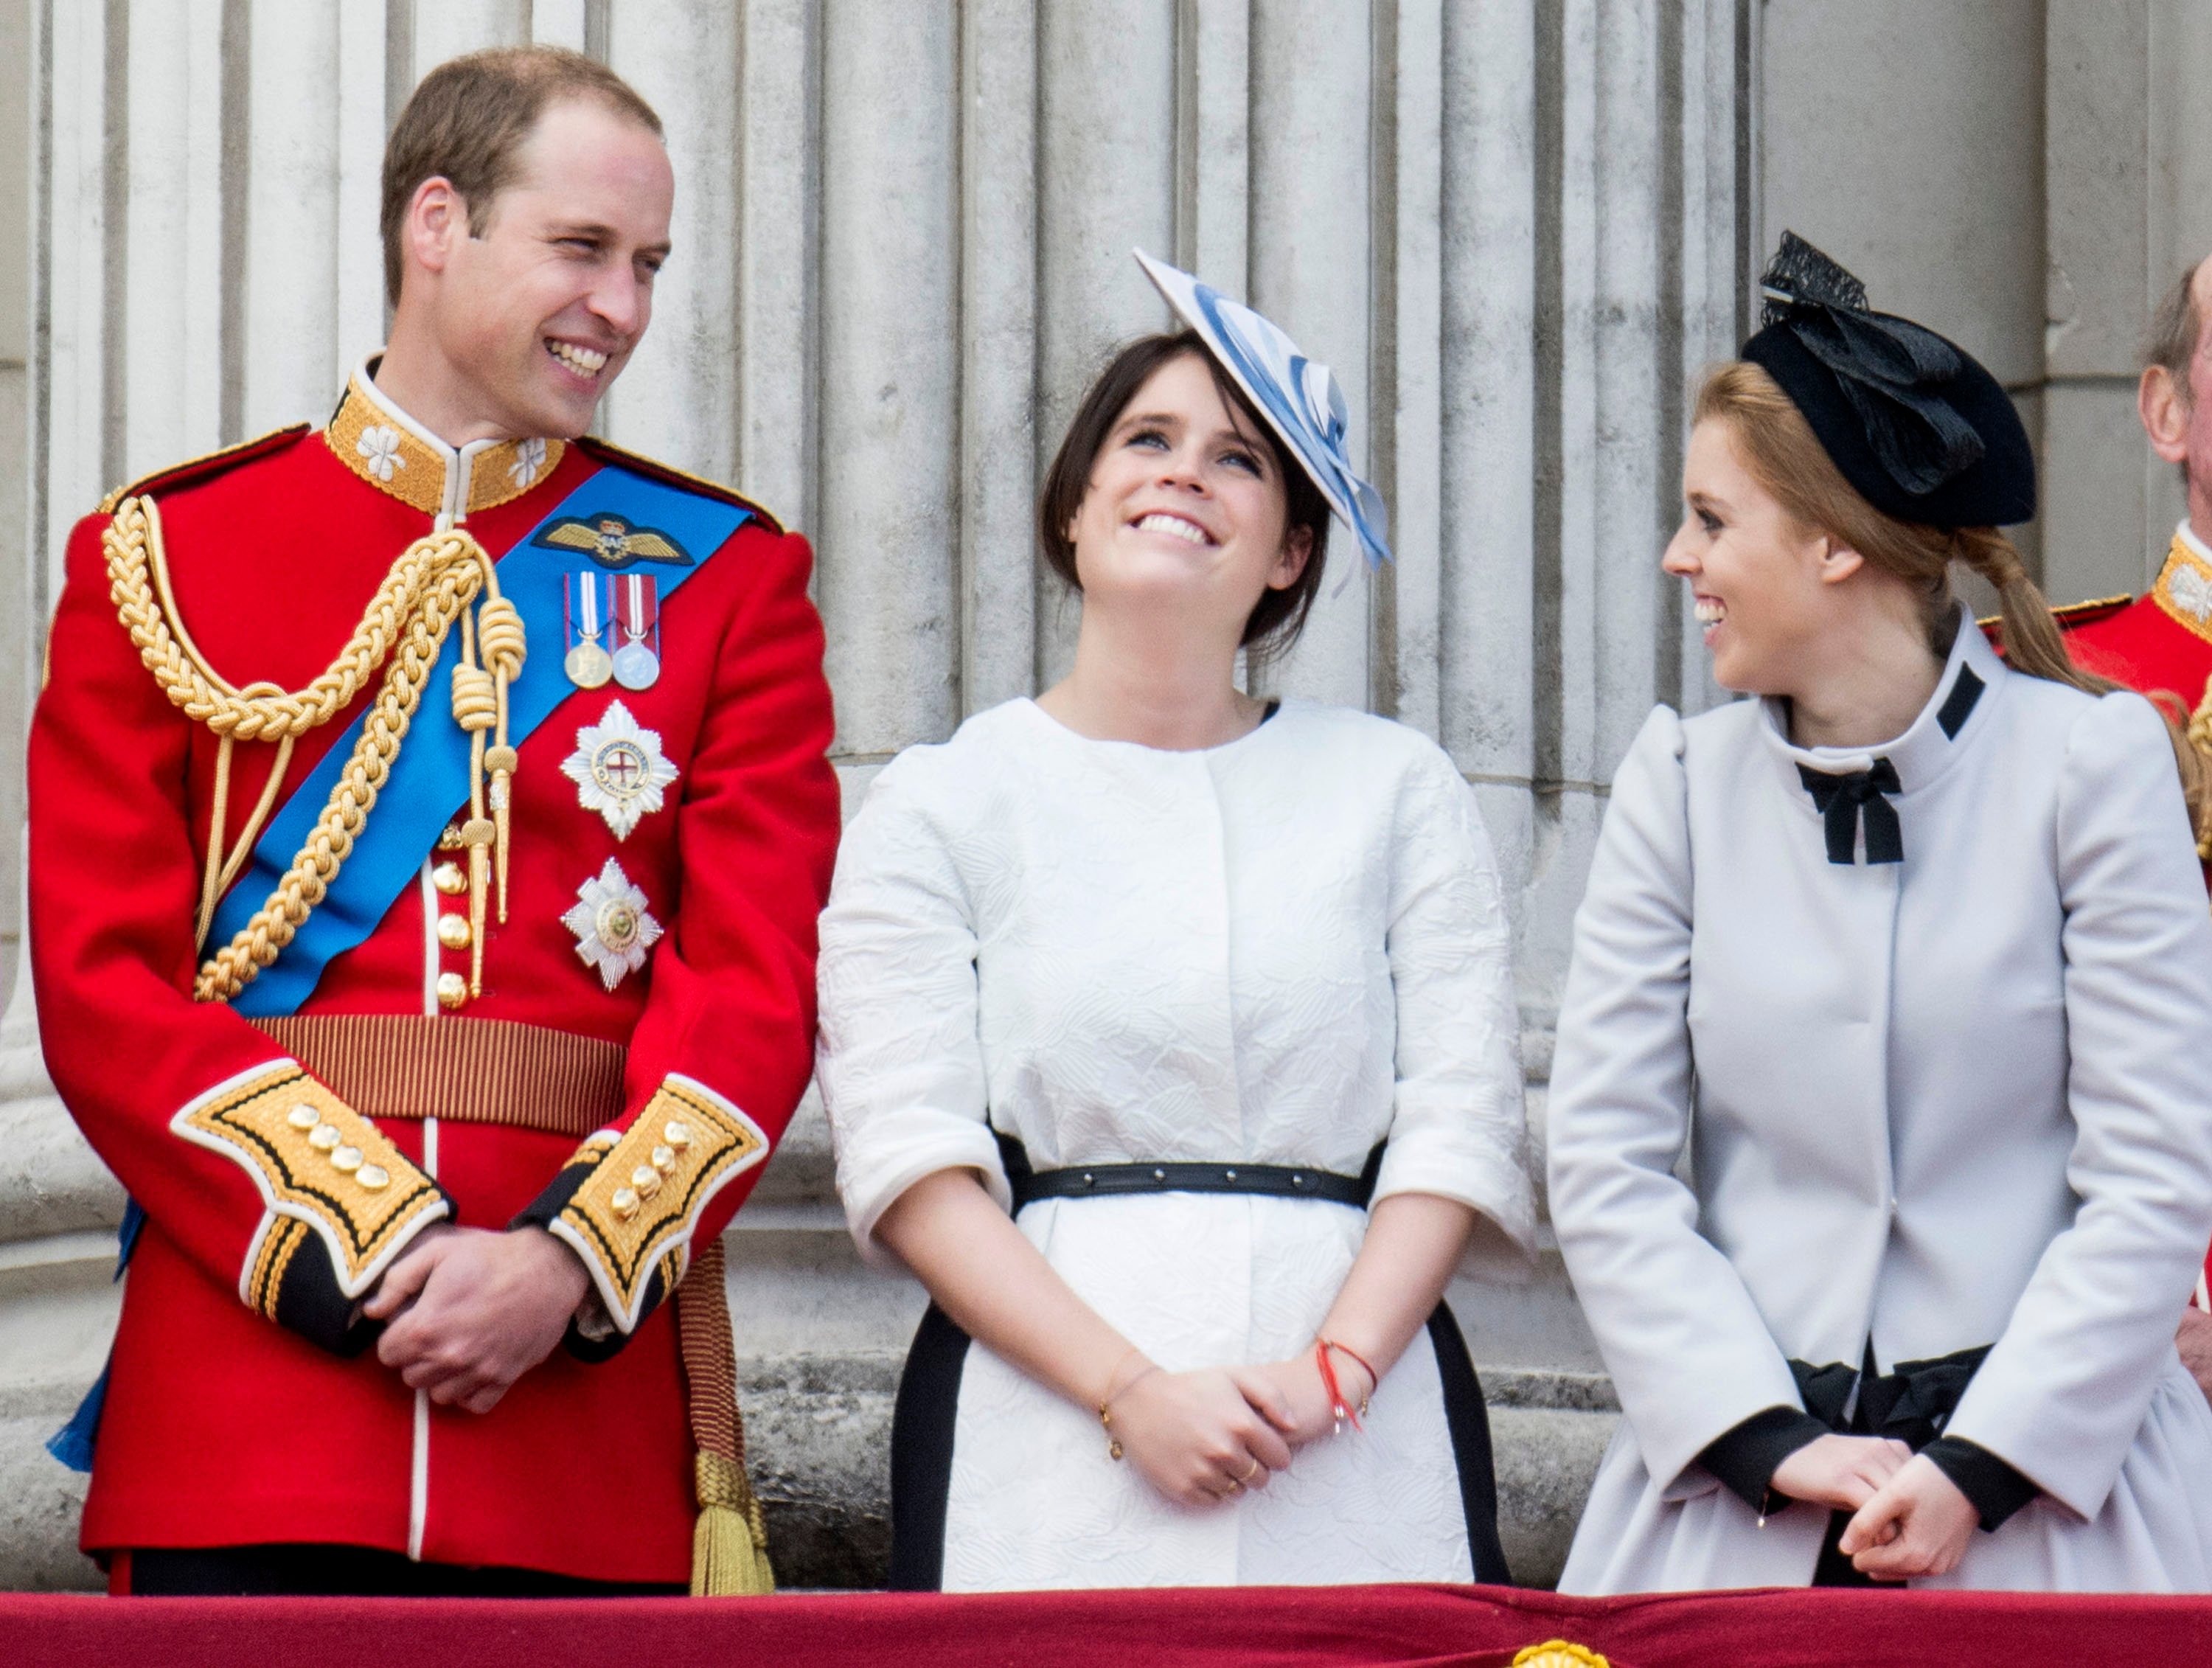 Prince William, Duke of Cambridge with Princess Eugenie and Princess Beatrice during the annual Trooping The Colour ceremony at Buckingham Palace